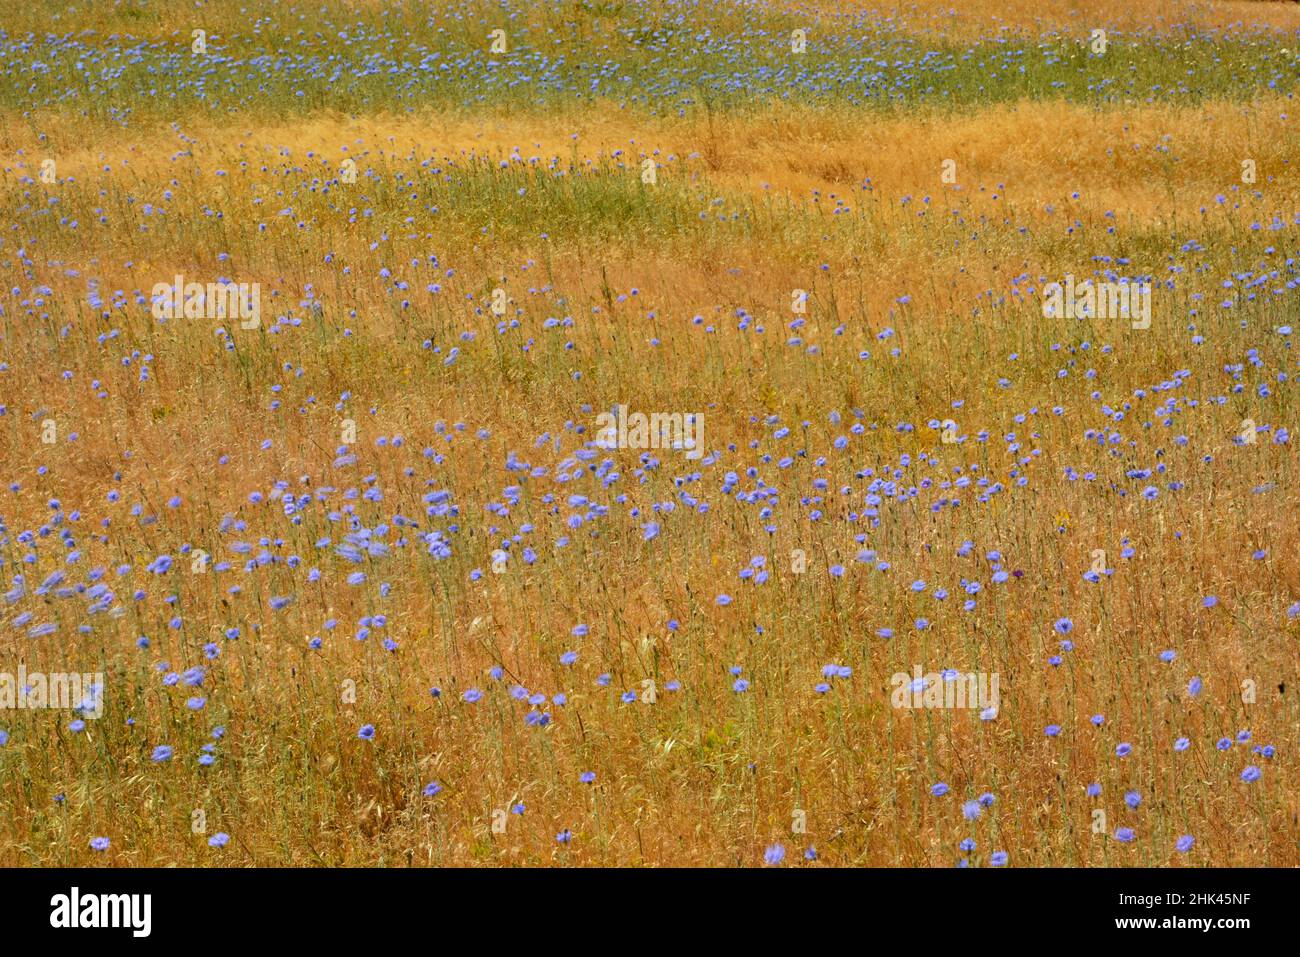 USA, Oregon, Columbia River Gorge National Scenic Area. Bachelor buttons in field. Stock Photo